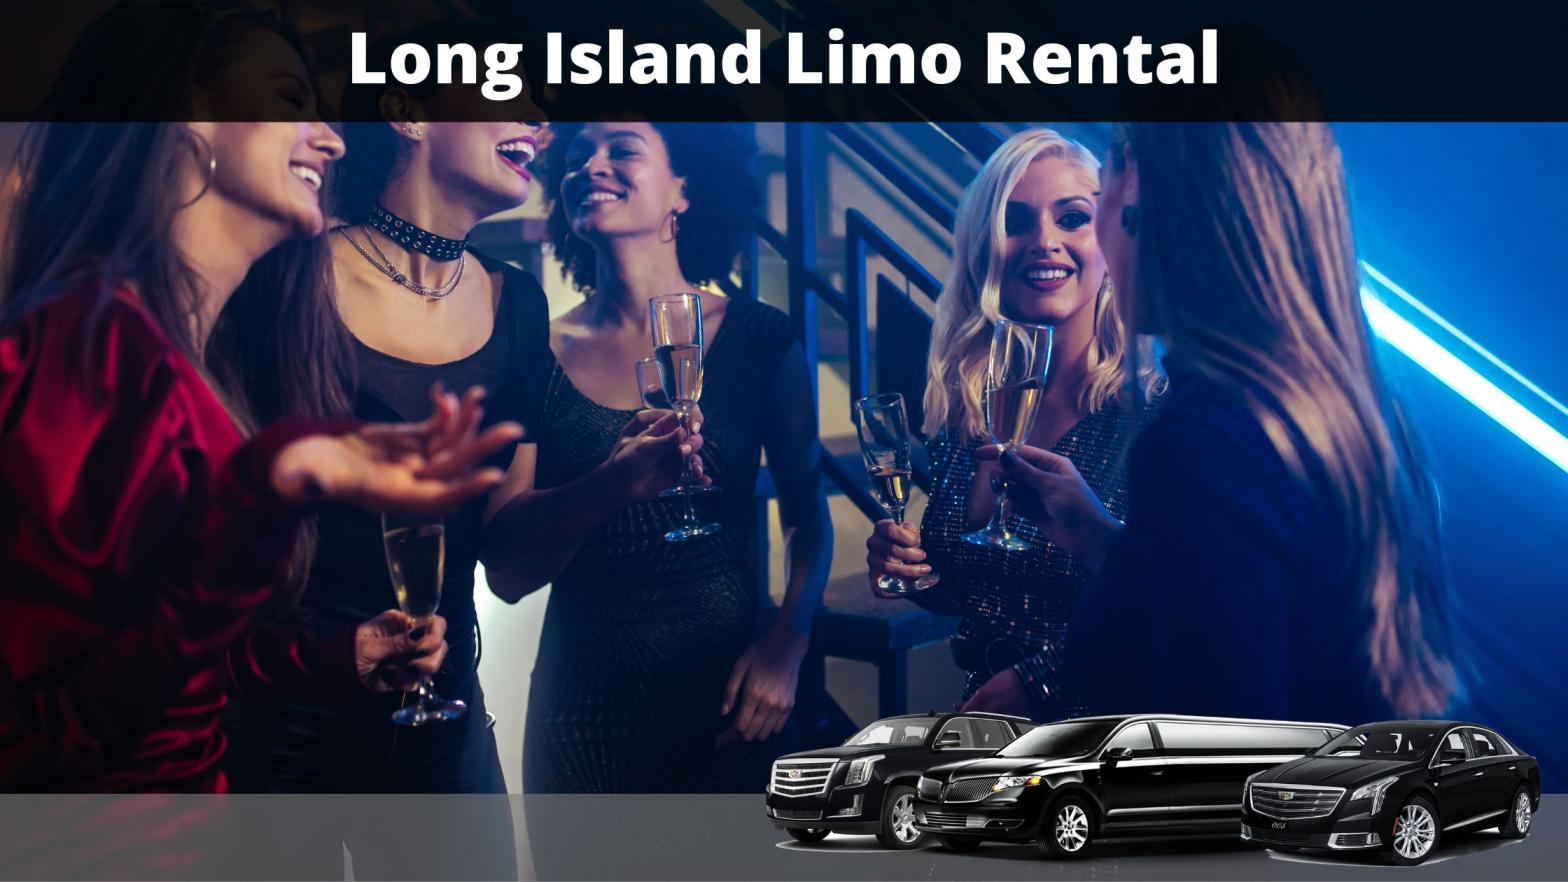 Bar Hopping And Night Out Limo Service in Long Island, NY